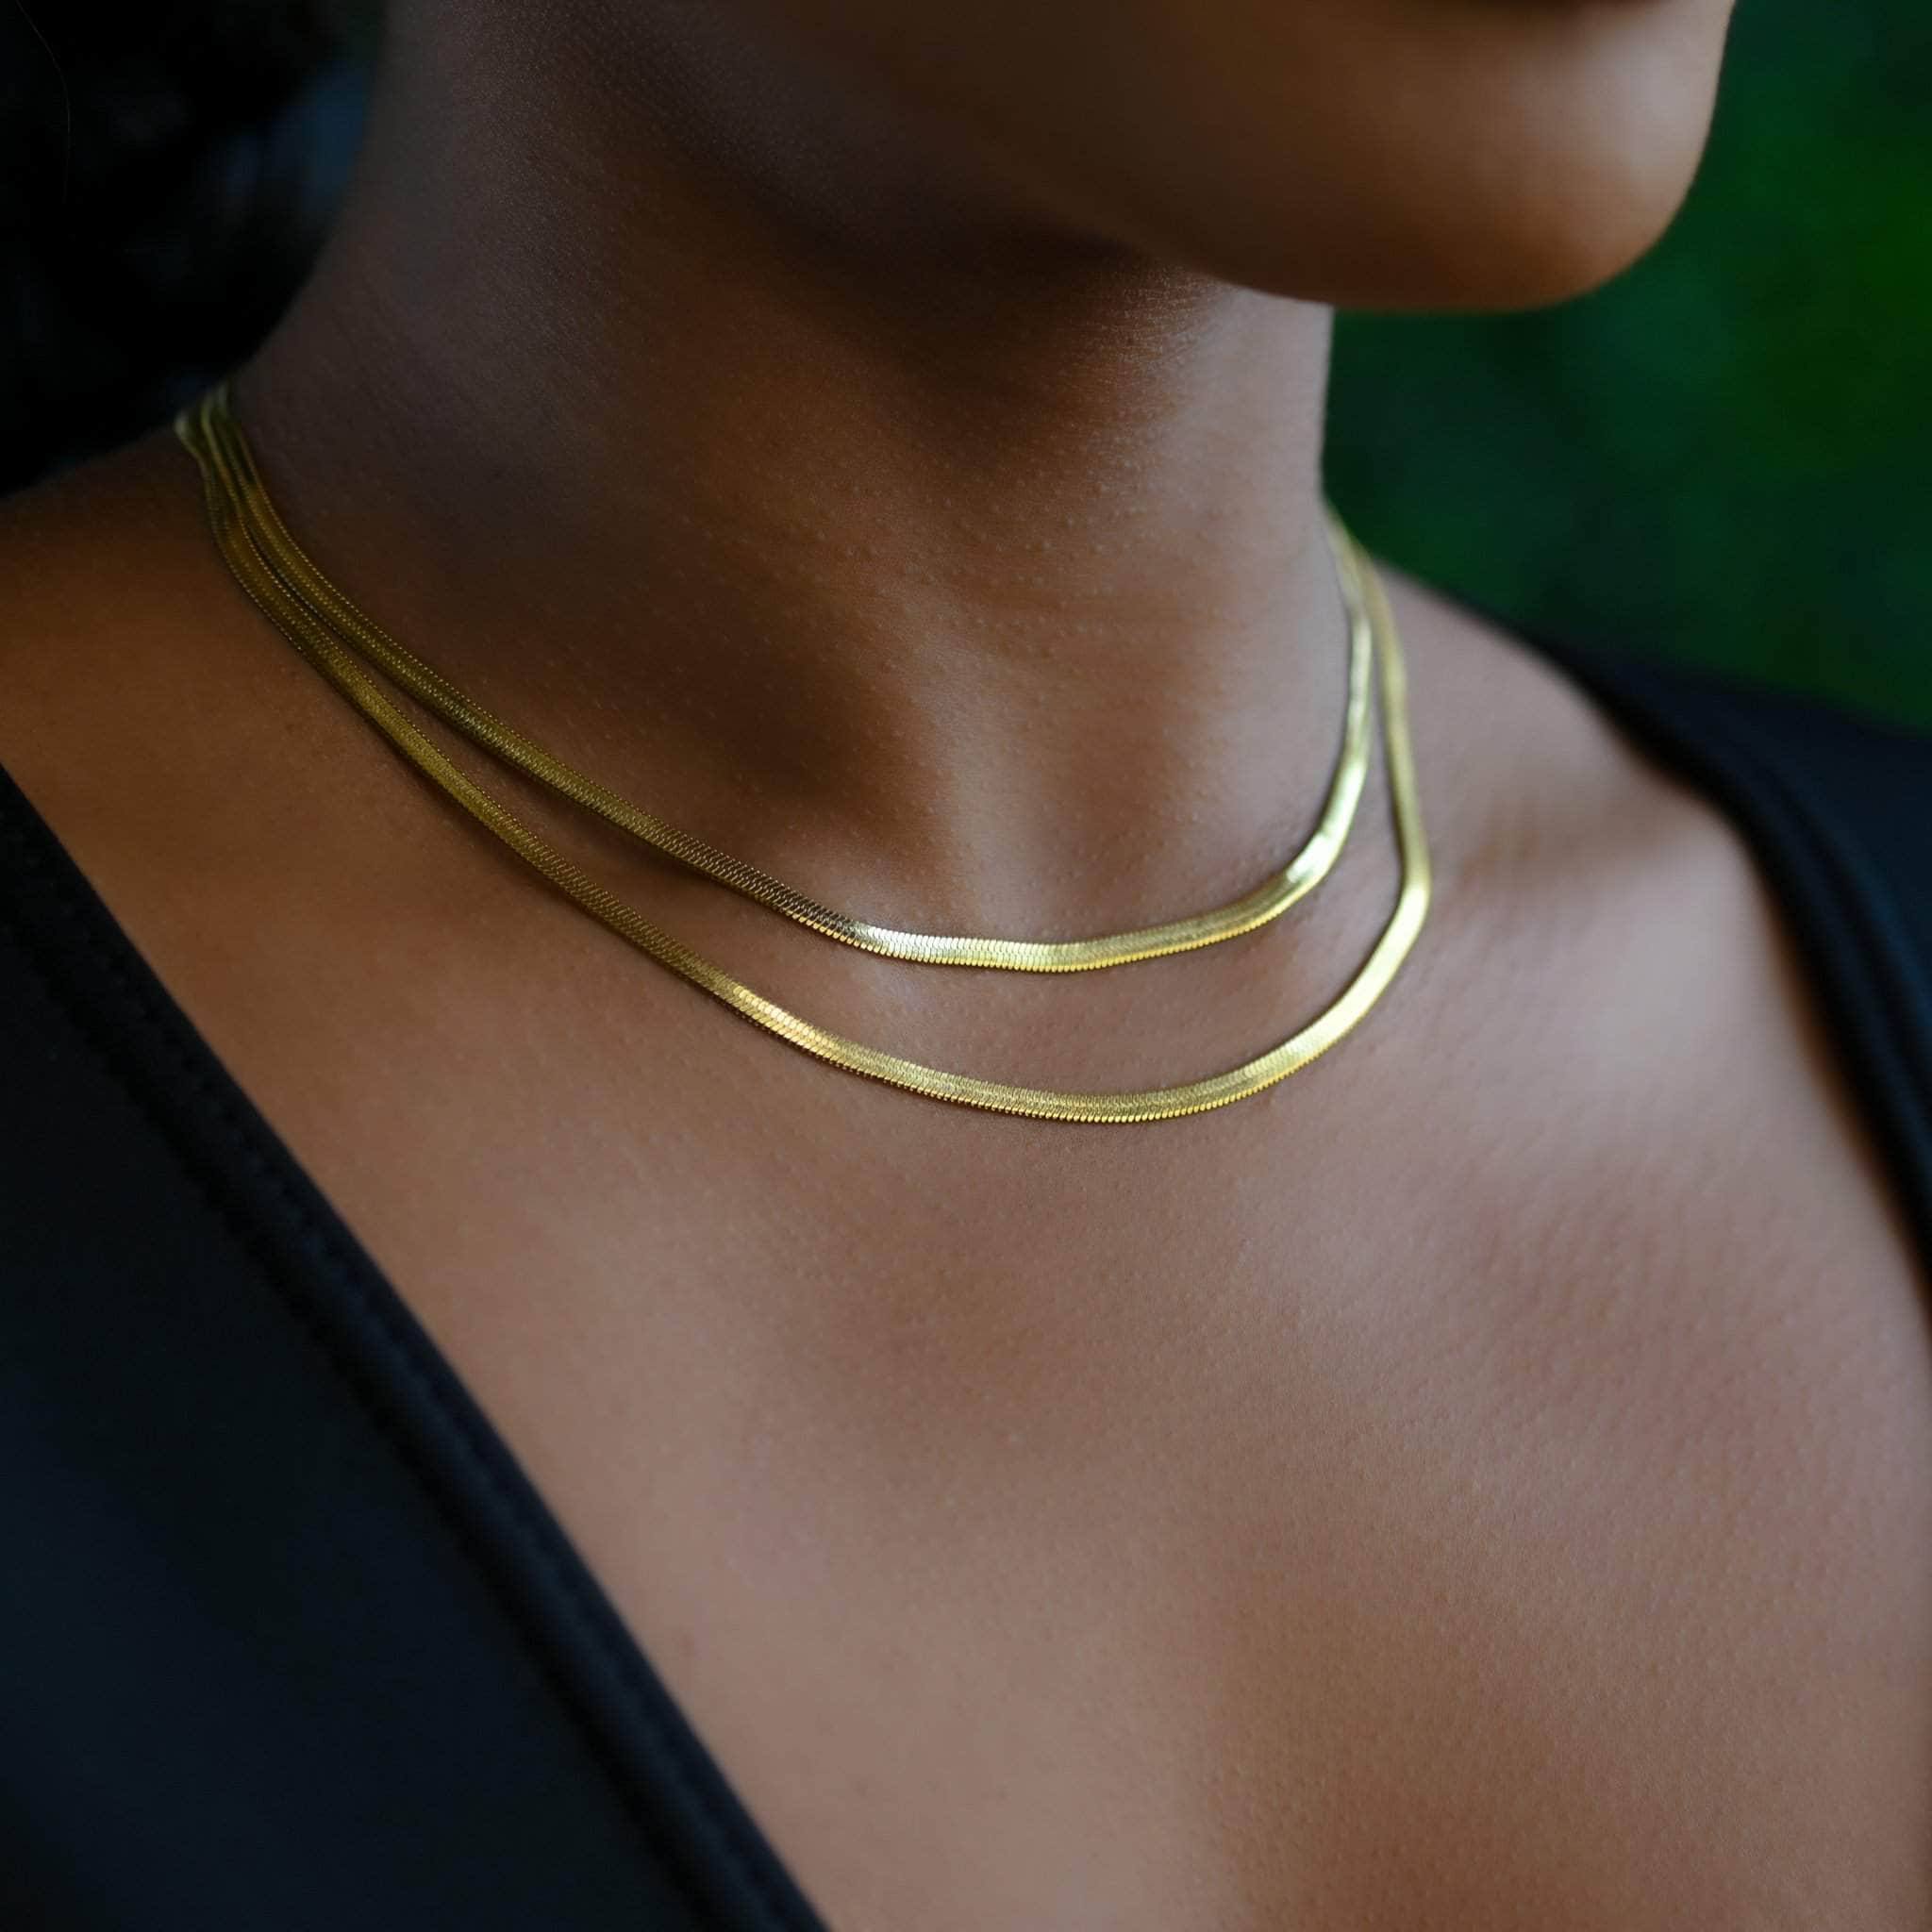 Buy 14K Solid Gold Herringbone Necklace 5mm Thick , 16 18 20 24, Real Gold Herringbone  Chain, 14K Gold Herringbone, Herringbone Gold, Women Online in India - Etsy